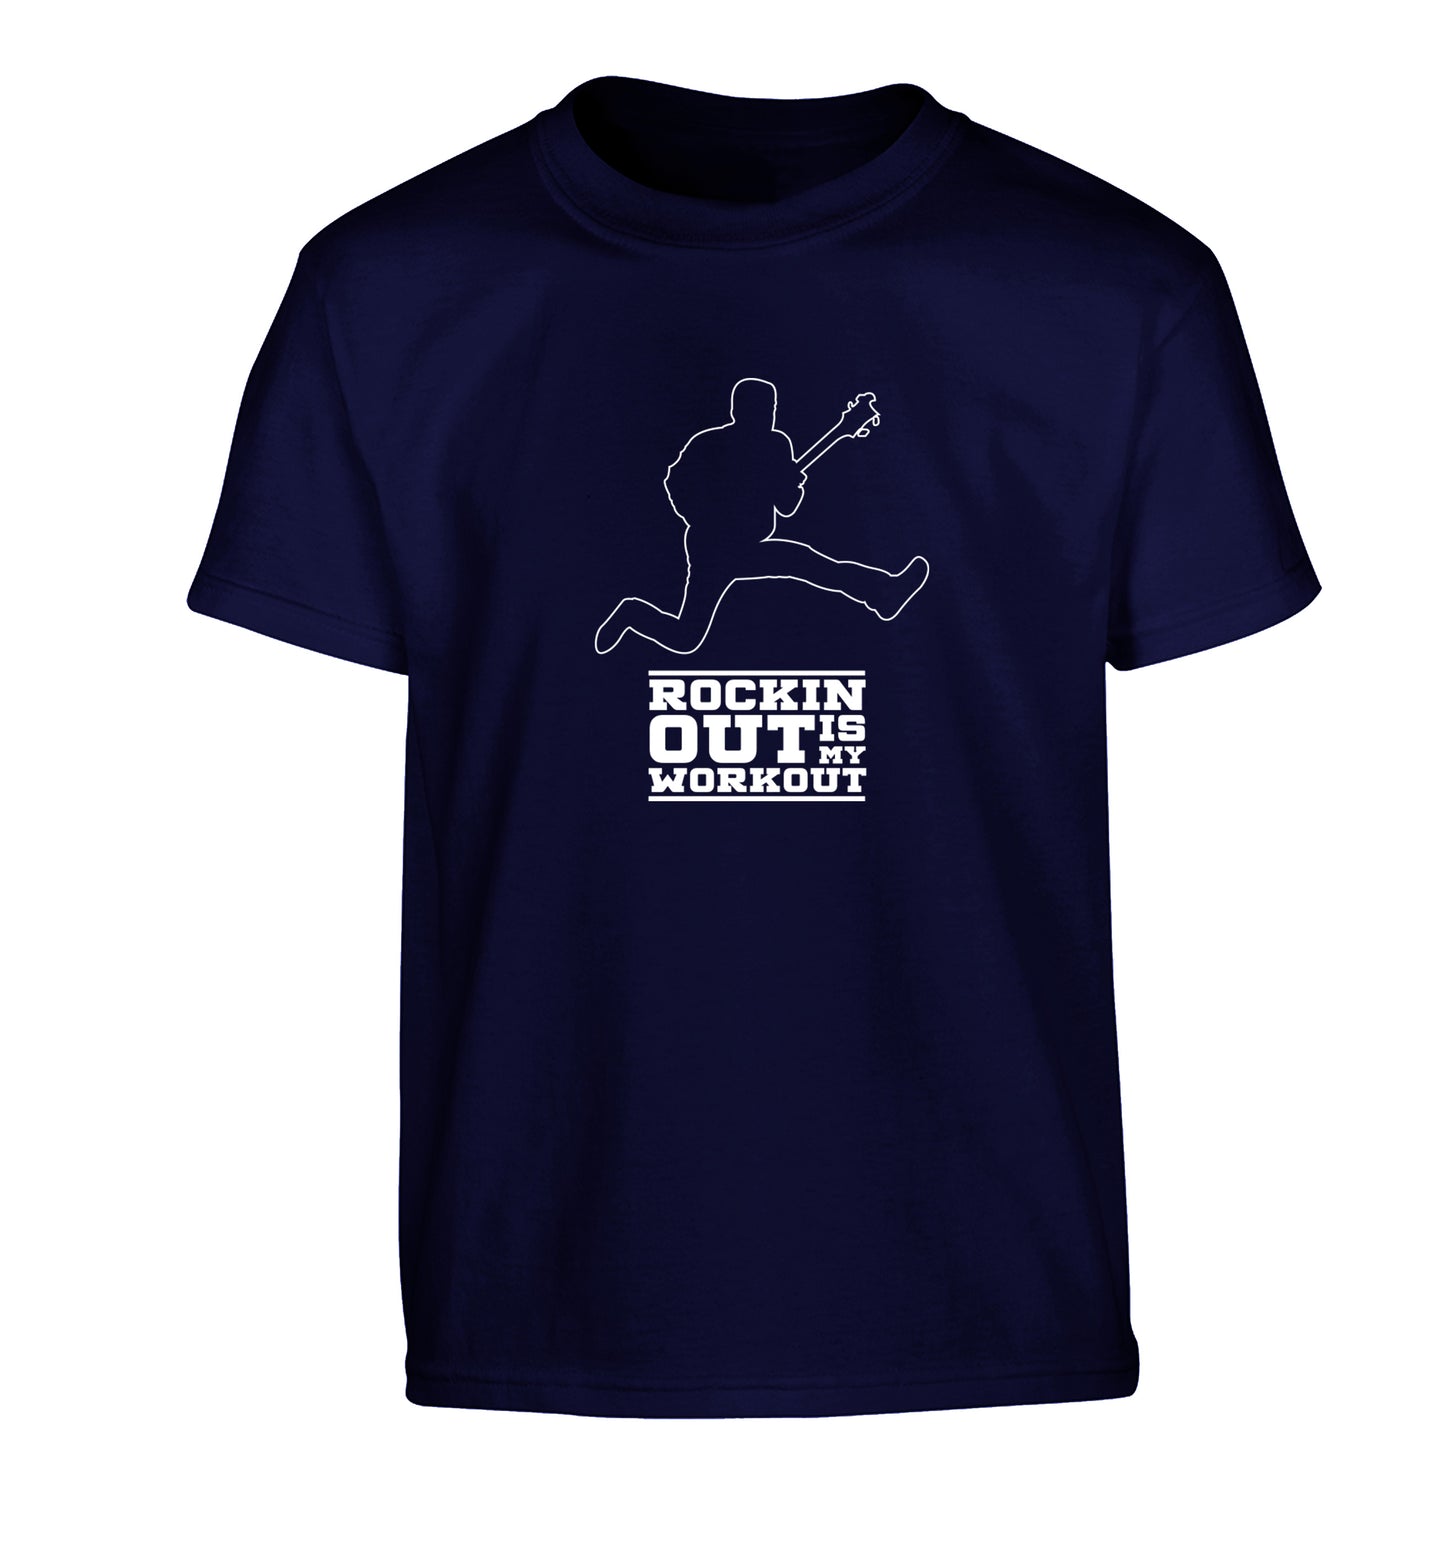 Rockin out is my workout 2 Children's navy Tshirt 12-13 Years